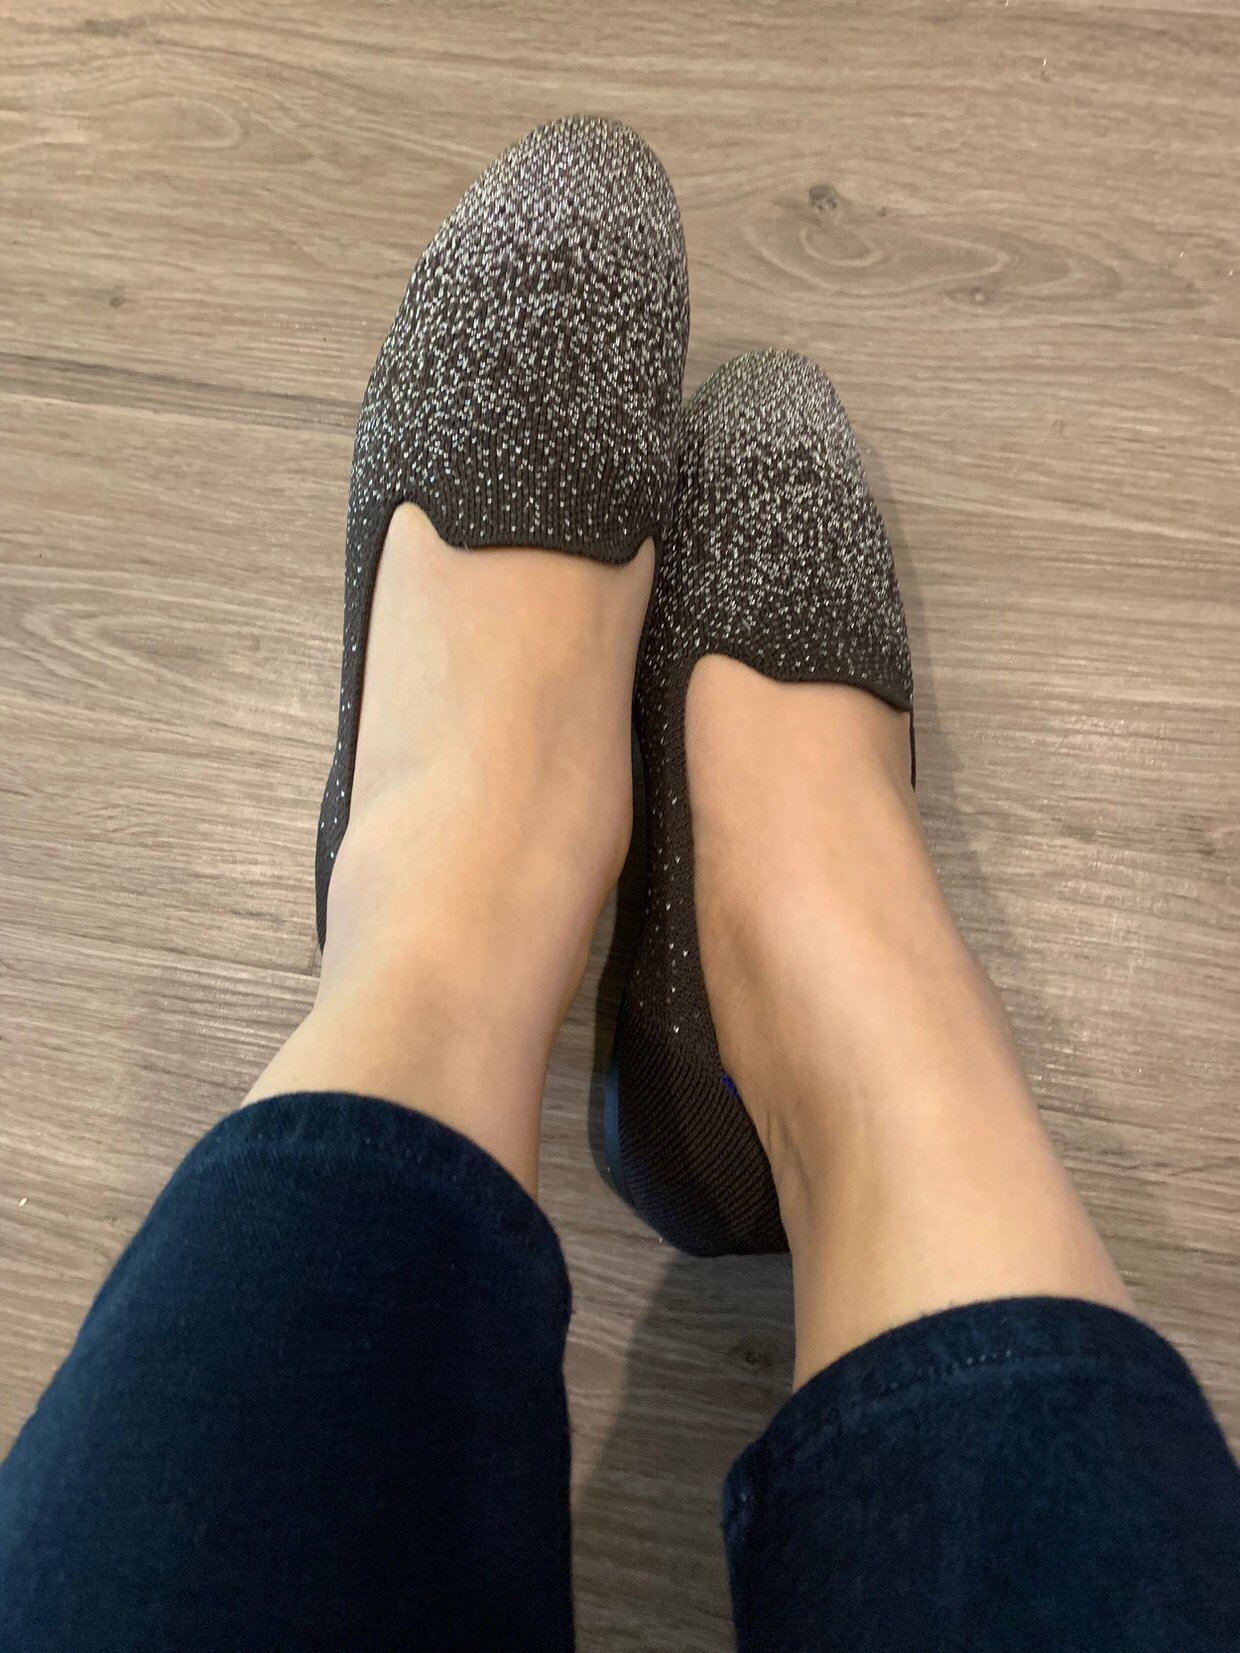 shoes similar to rothy's loafers